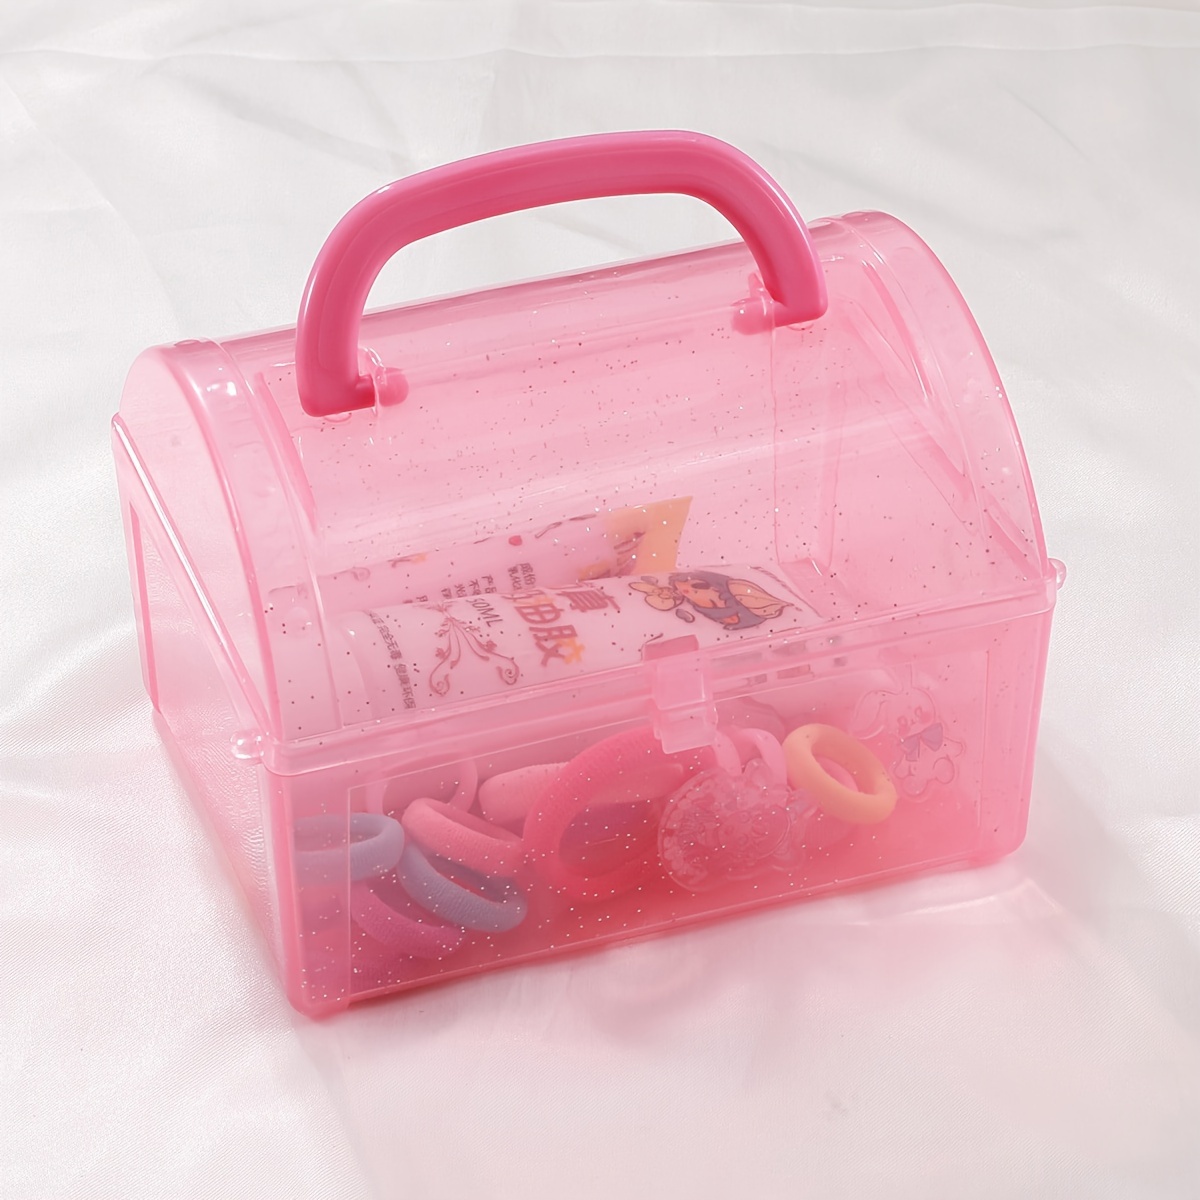 Pekky Plastic Small Handle Storage Box for Art Craft and Cosmetic